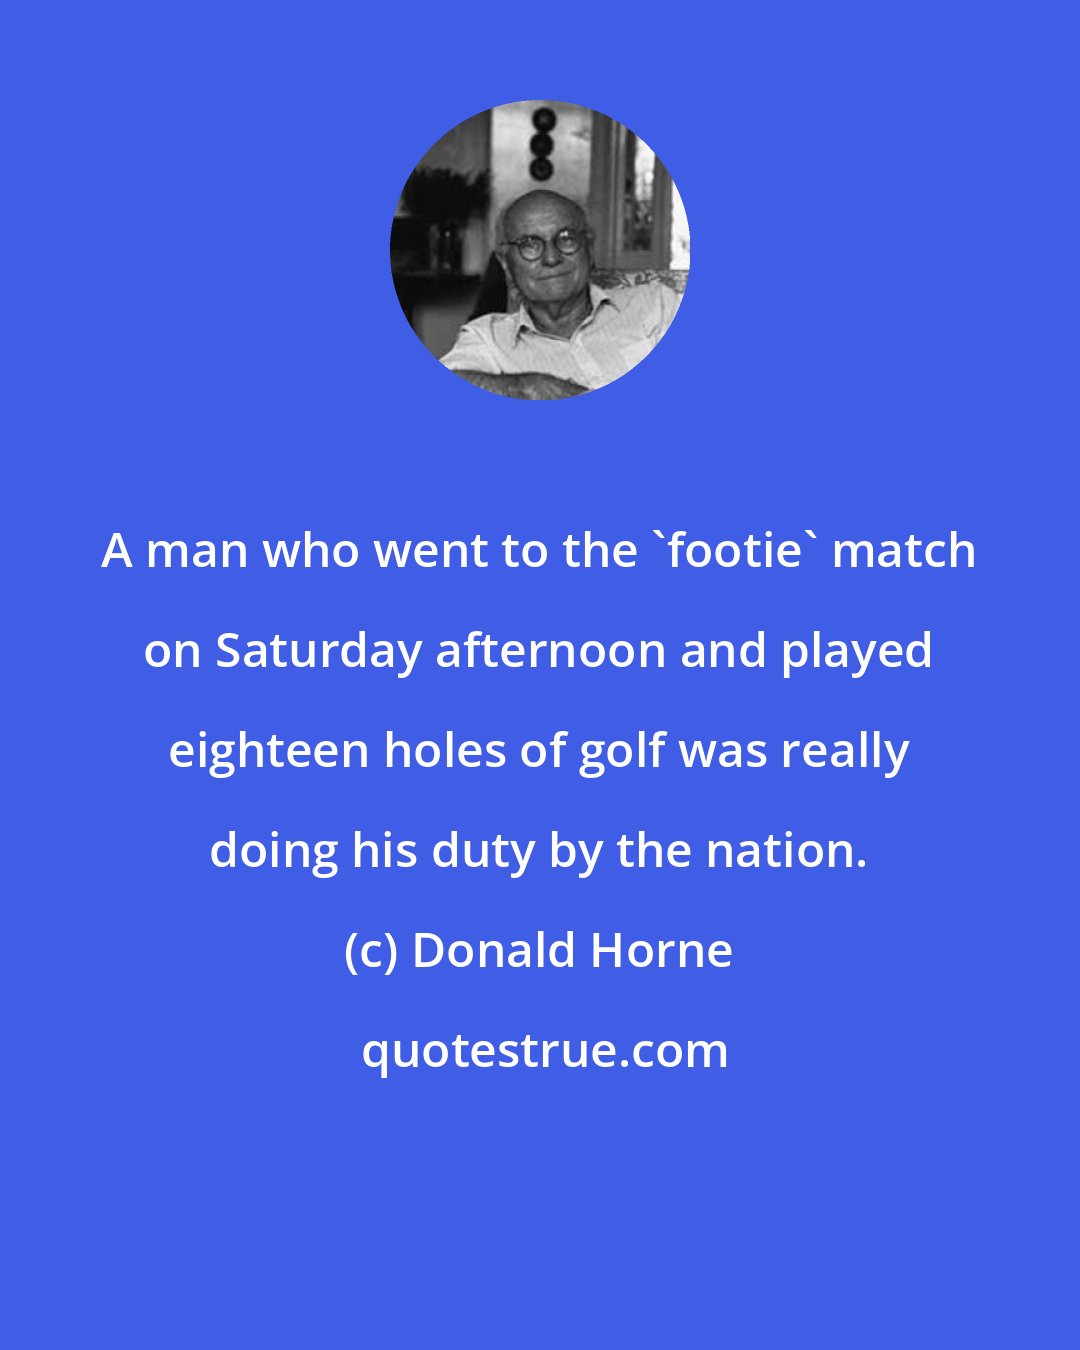 Donald Horne: A man who went to the 'footie' match on Saturday afternoon and played eighteen holes of golf was really doing his duty by the nation.